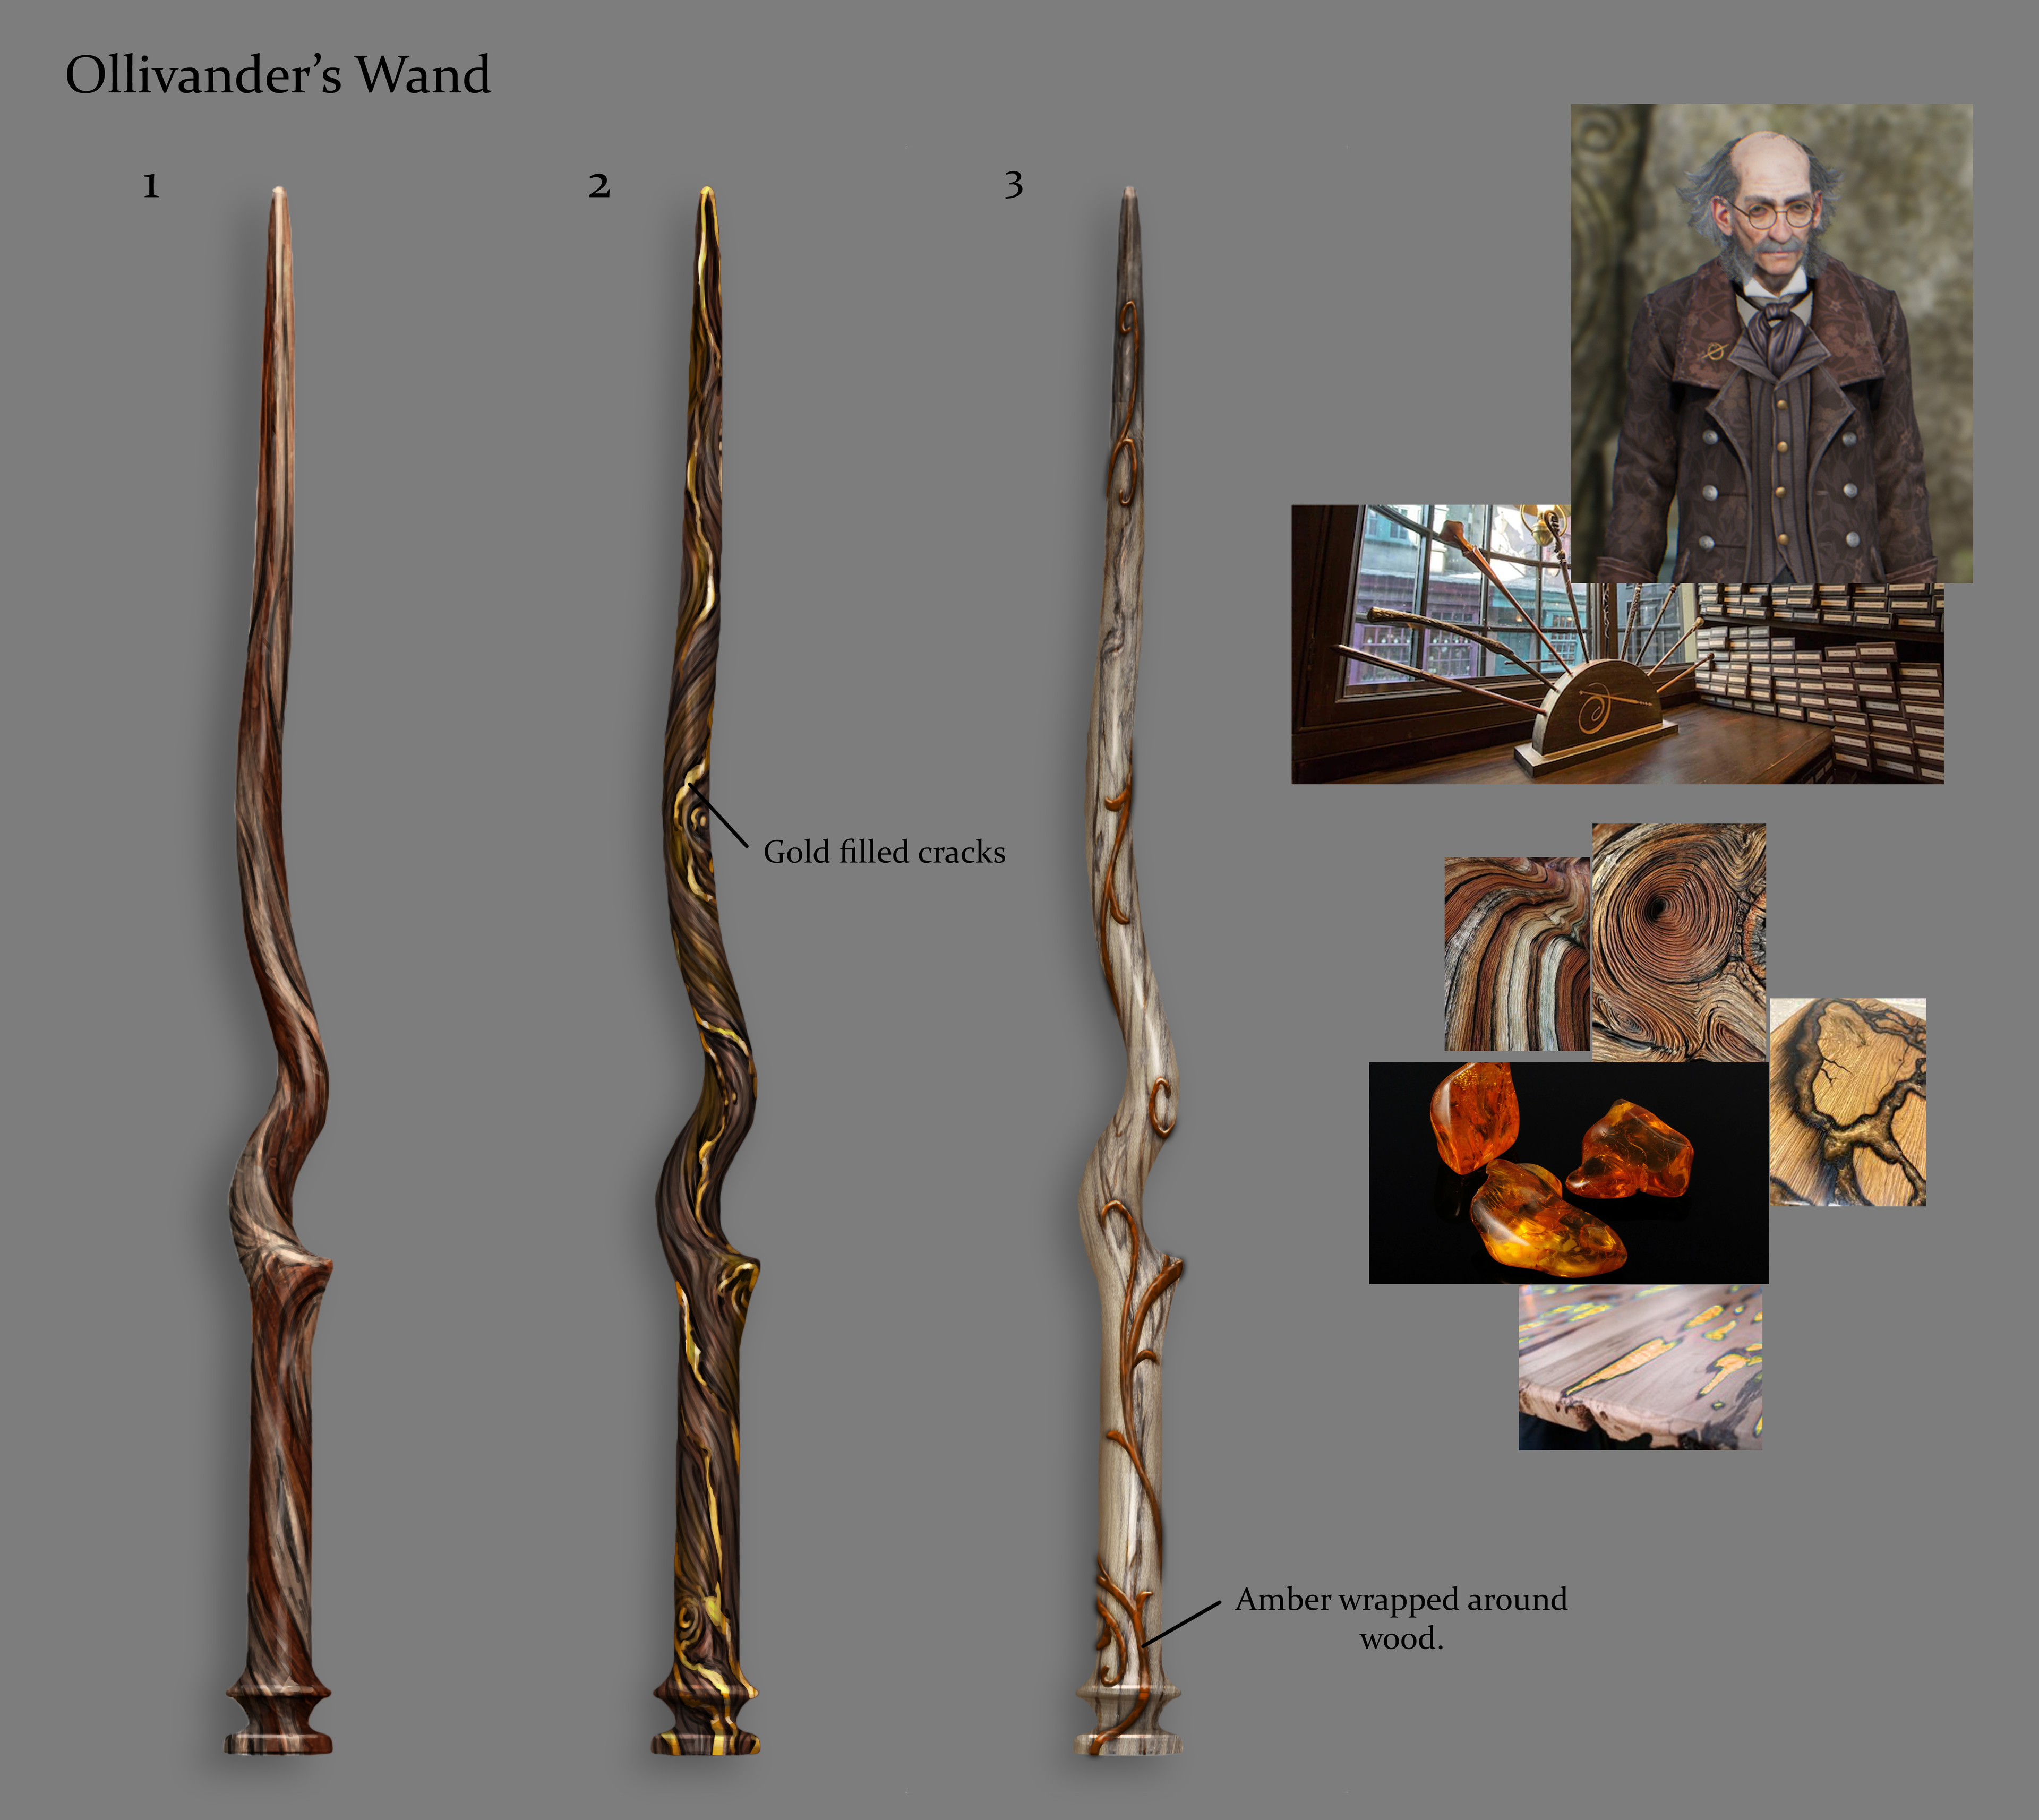 Concepts for Ollivander's wand. 